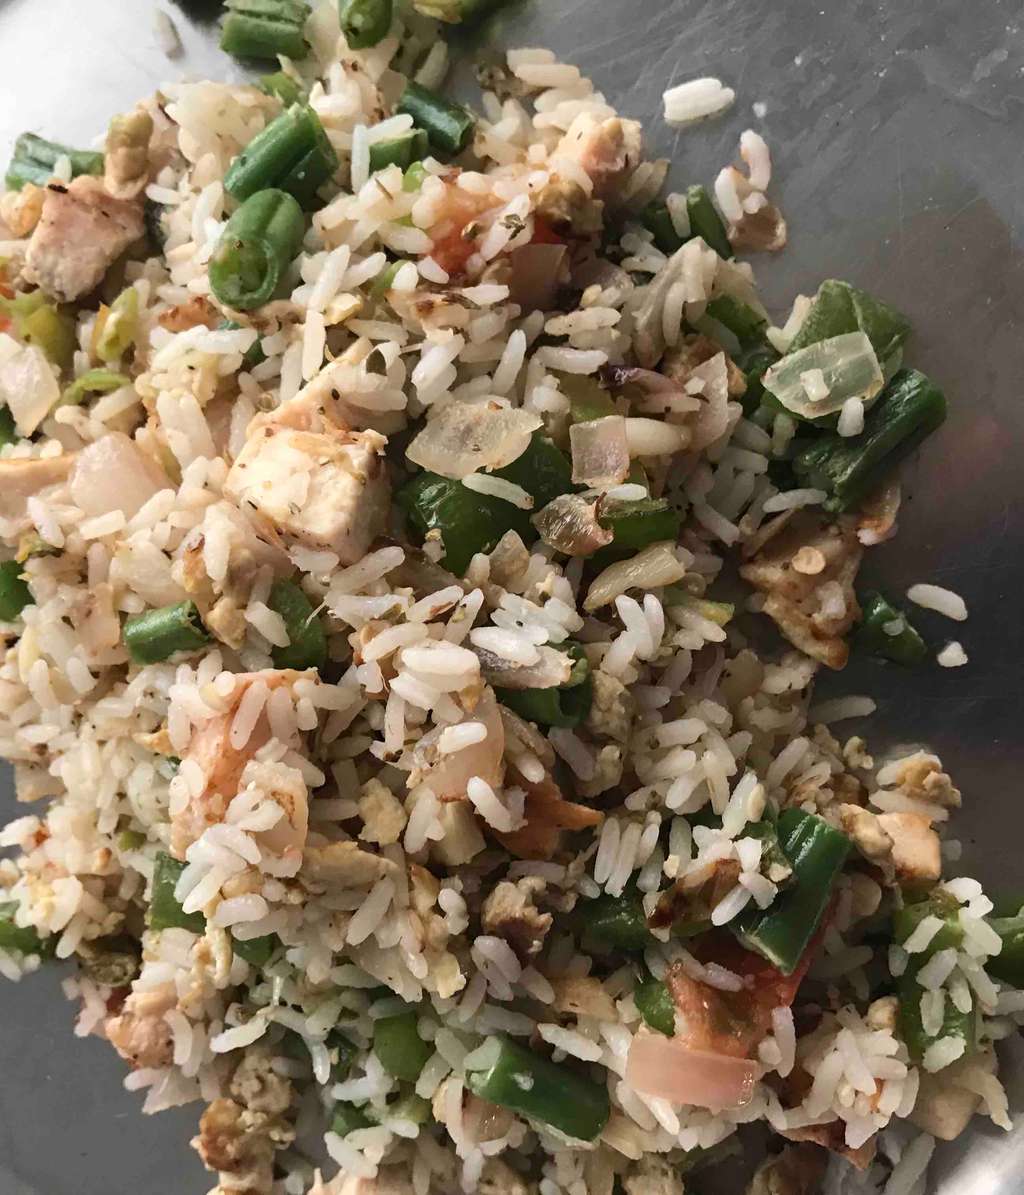 Herbed rice with chicken and veggies 